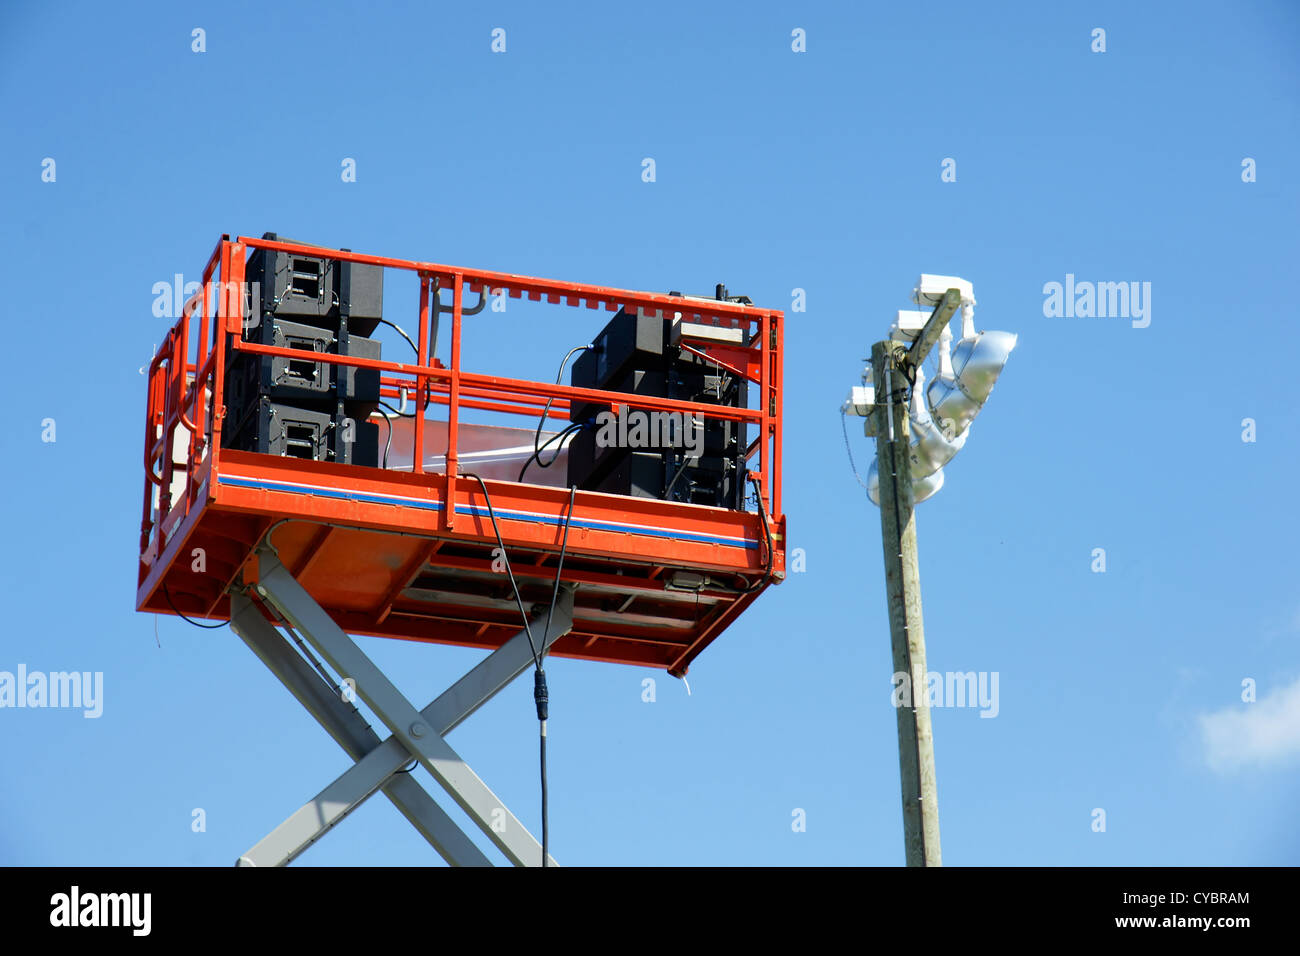 Stack of speaker equipment high in the sky on lift platform ready for outdoor concert in the park, beside lighting. Stock Photo